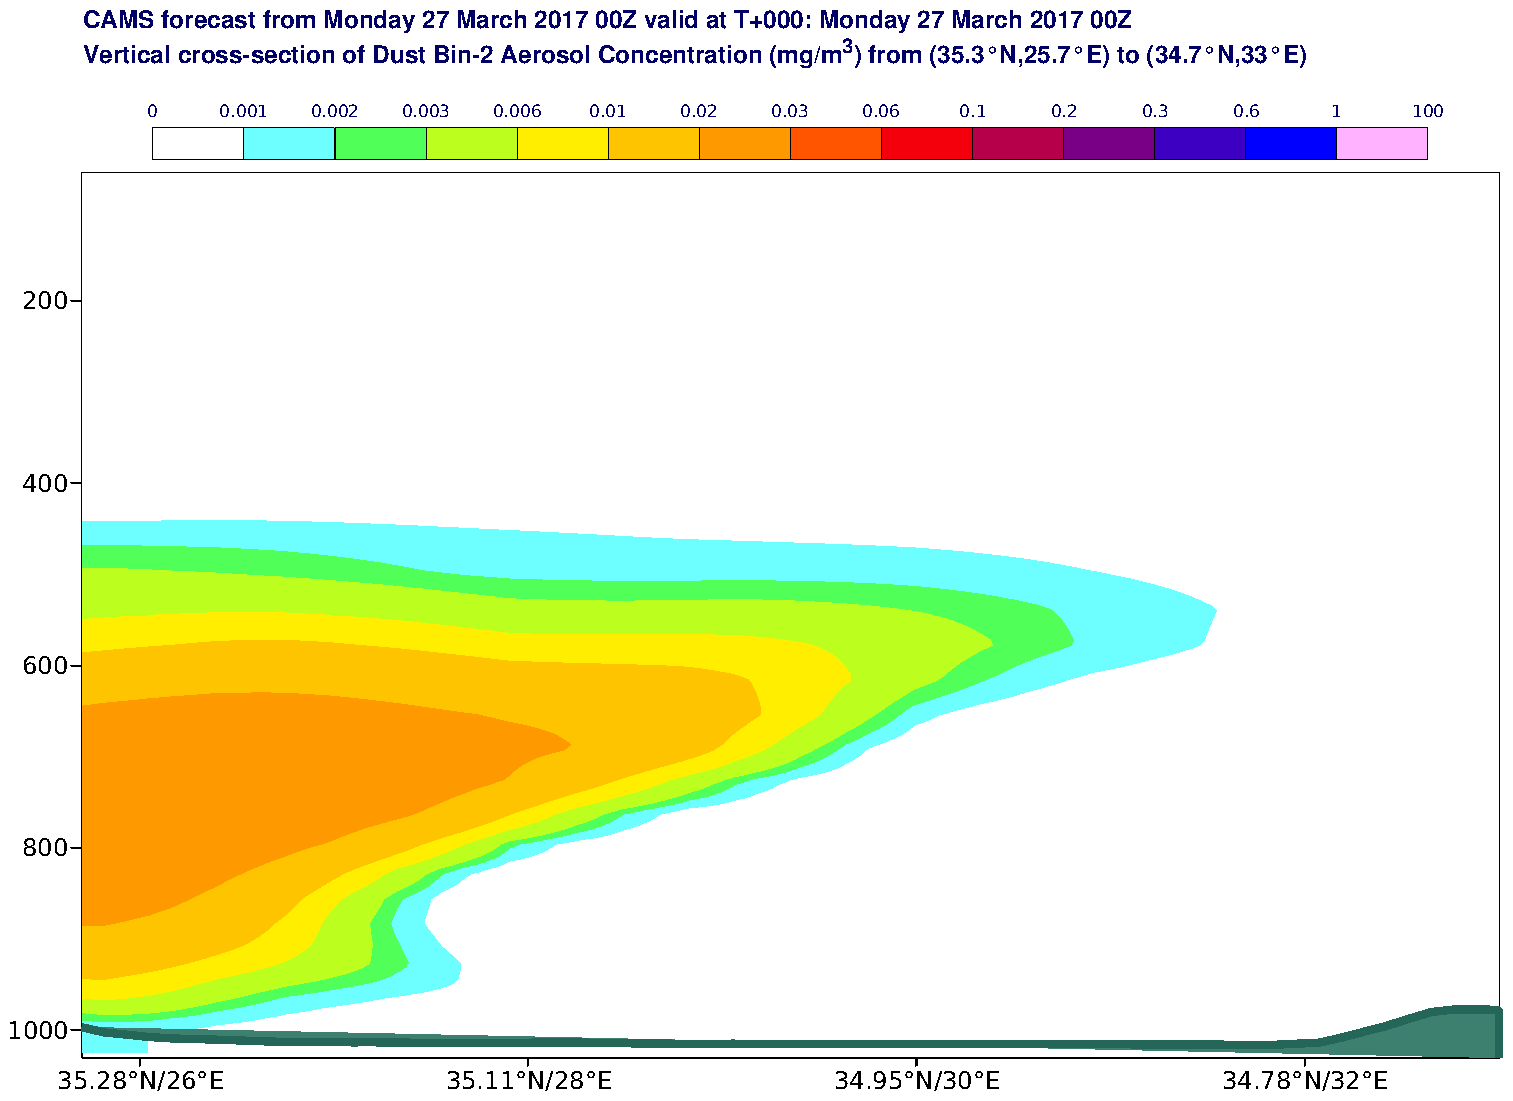 Vertical cross-section of Dust Bin-2 Aerosol Concentration (mg/m3) valid at T0 - 2017-03-27 00:00